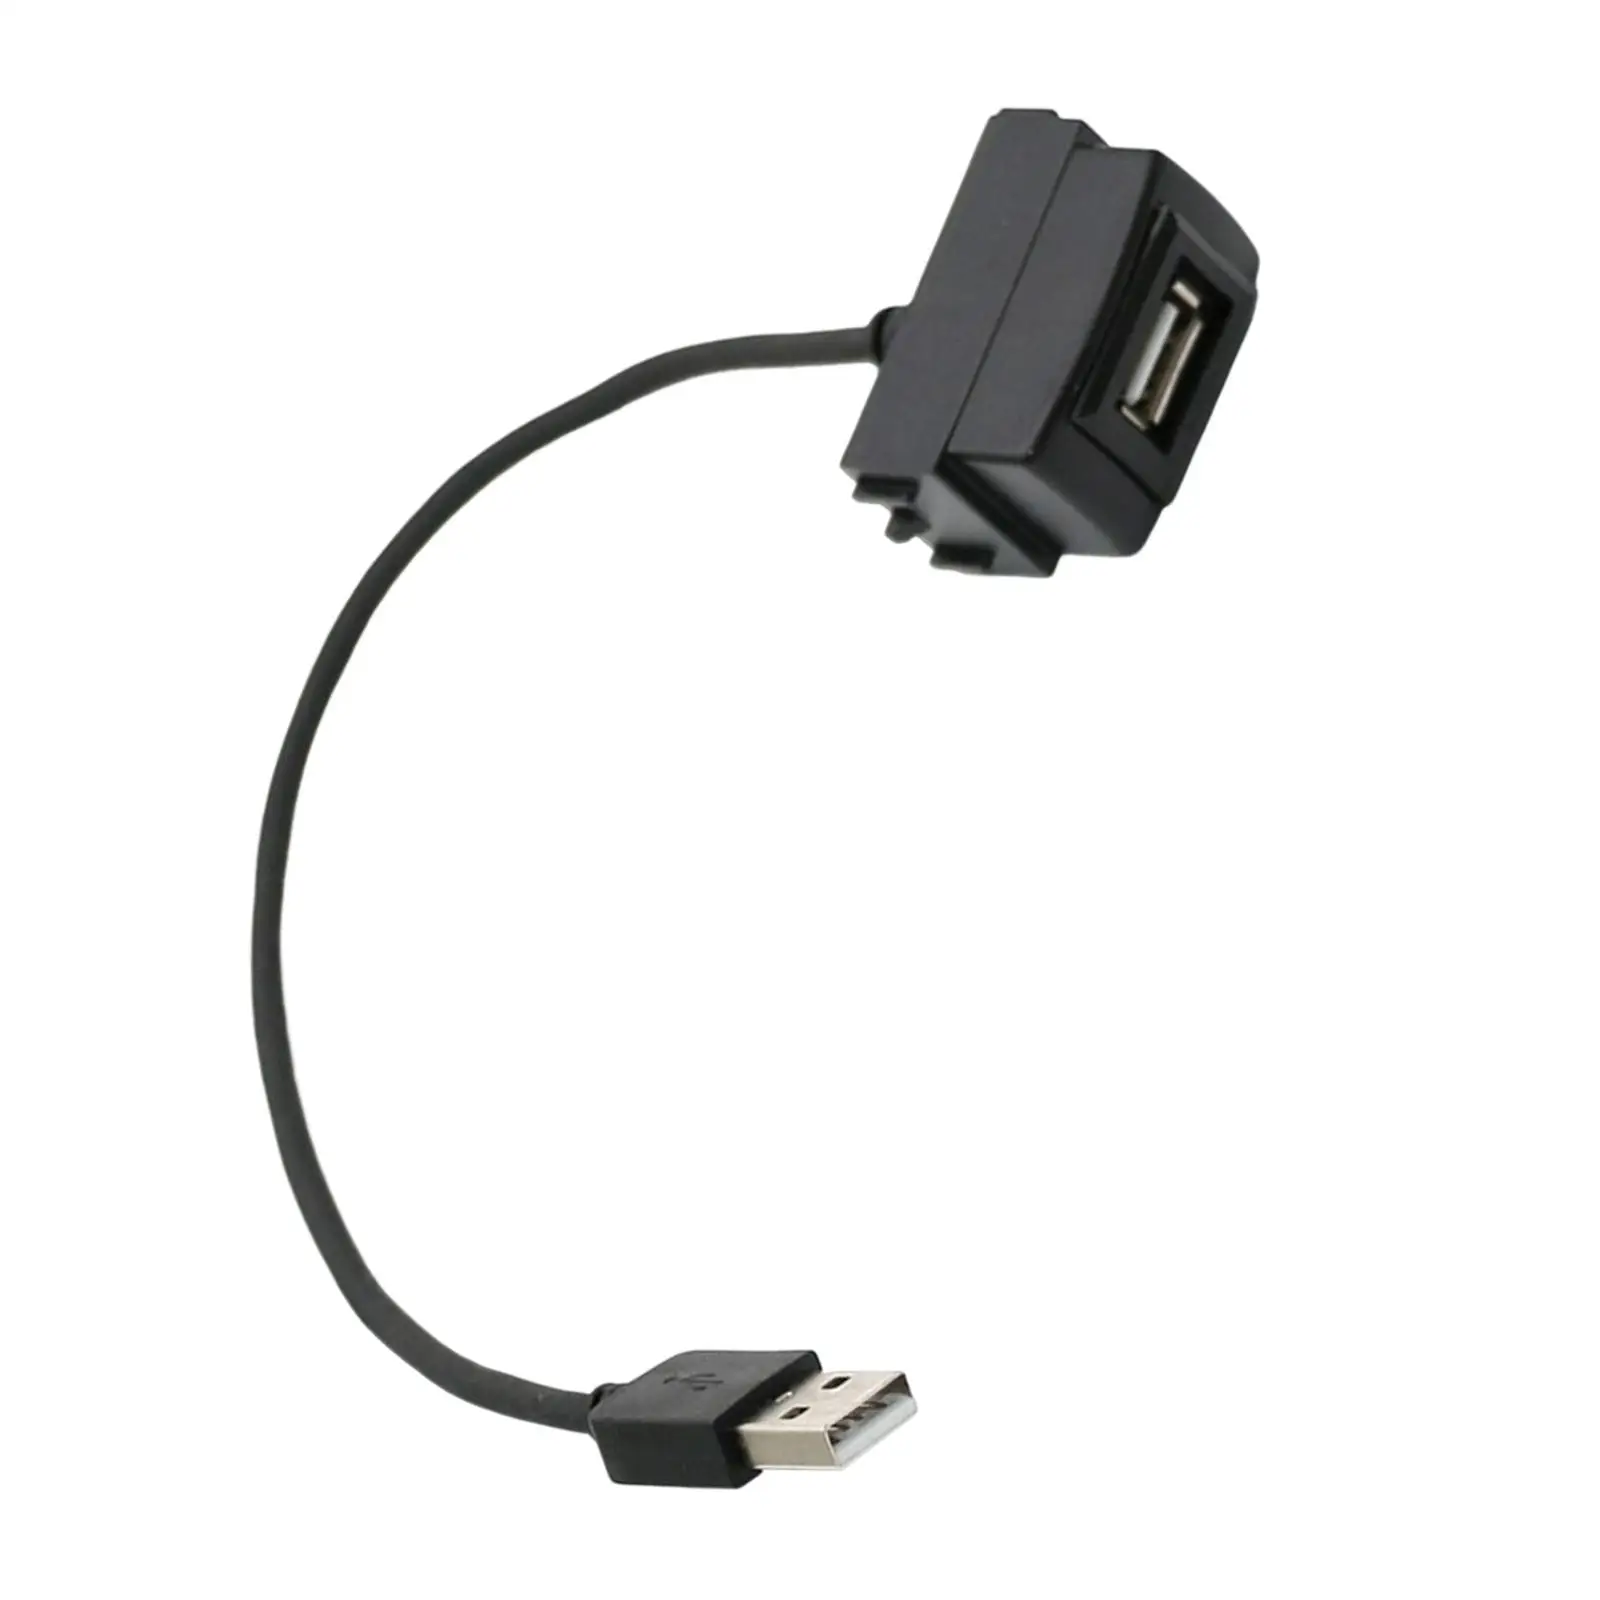 2 USB Extension Cable Data Transfer for March Spare Parts Direct Replaces